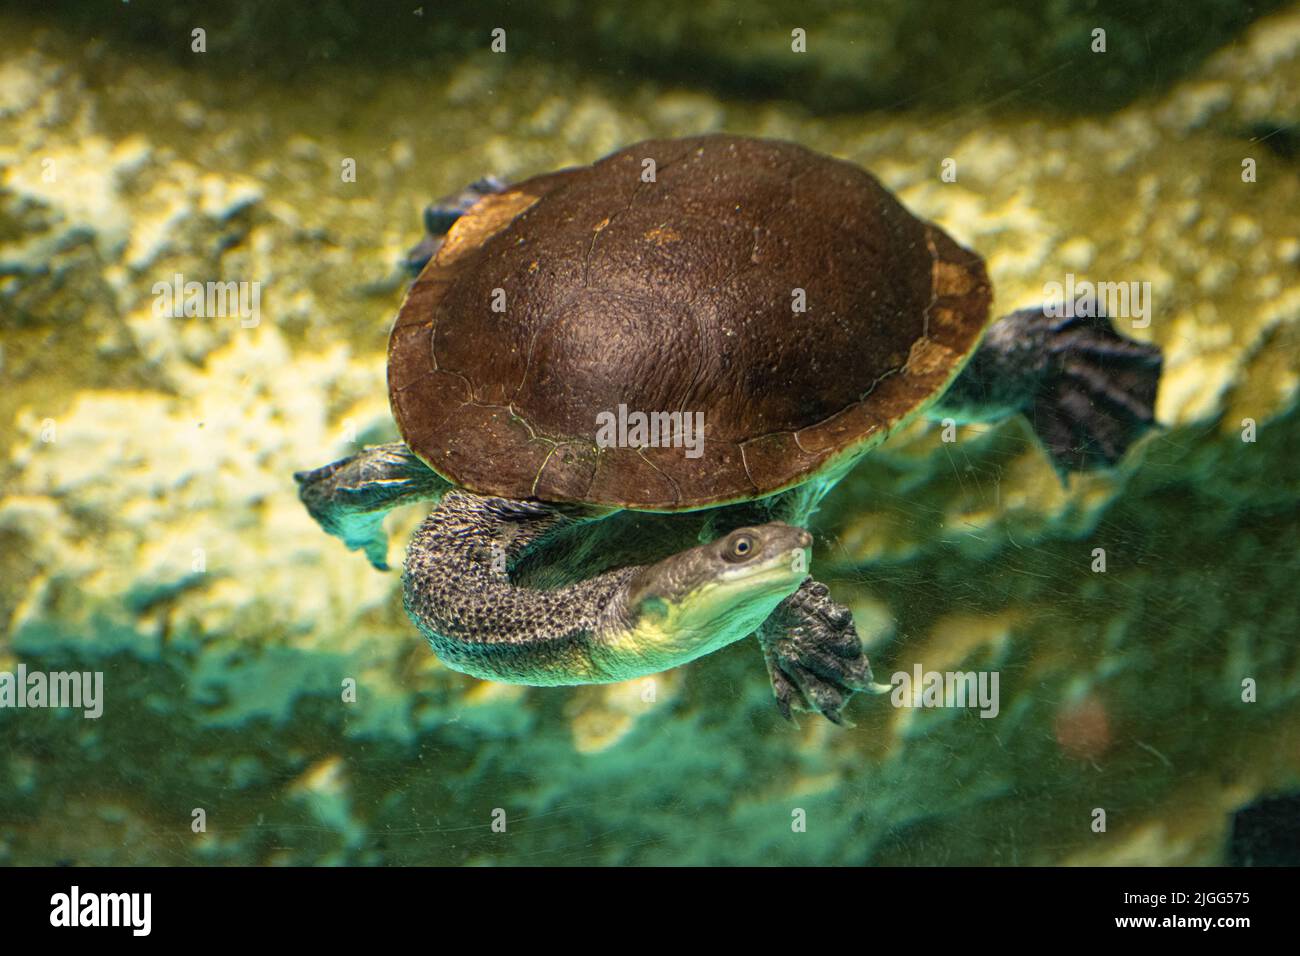 A closeup of an Austro-South American side-neck turtle (Chelidae) swimming in the water Stock Photo